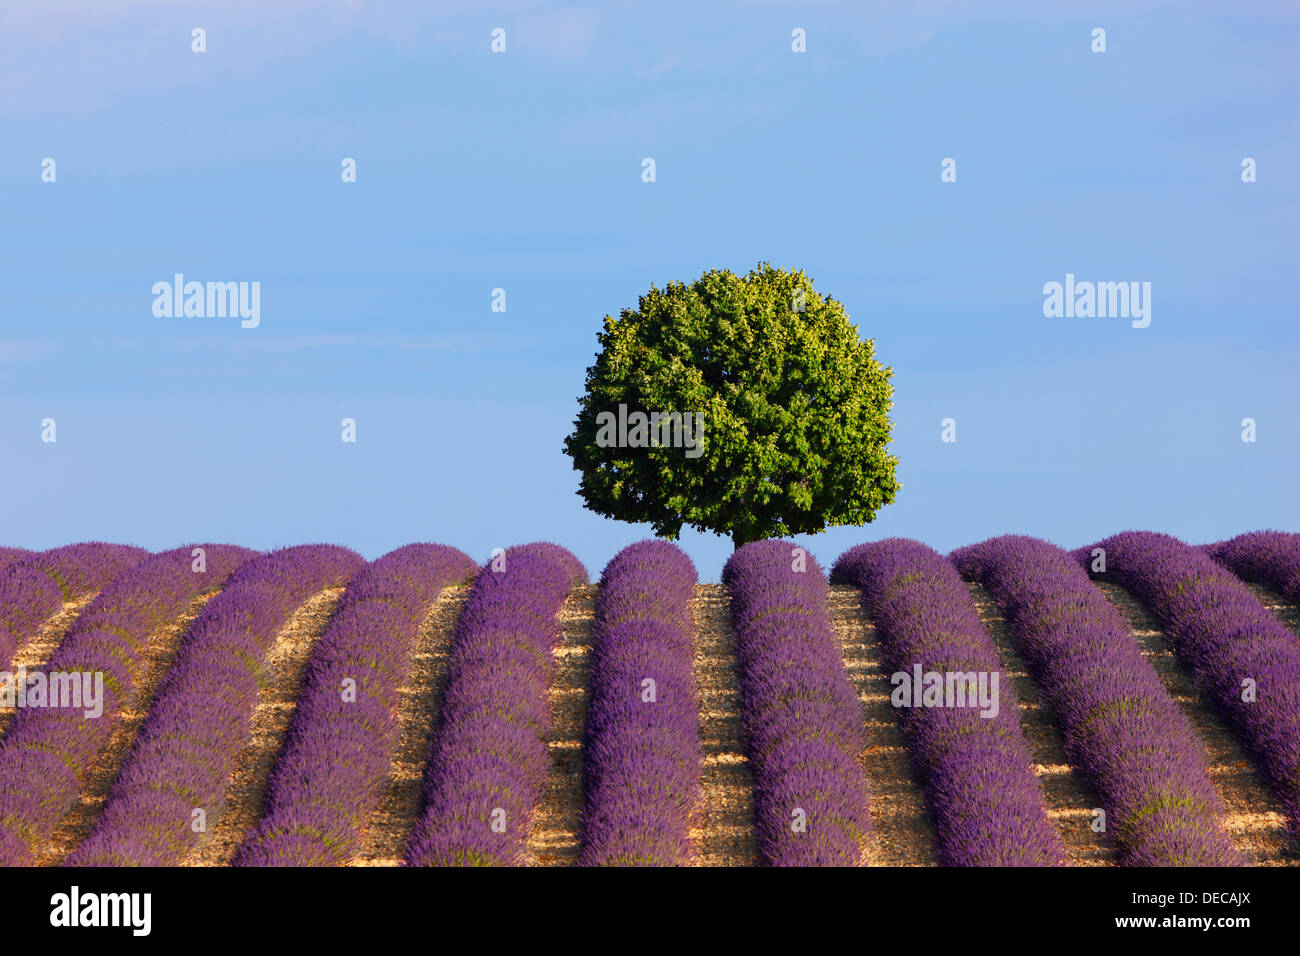 One tree in lavender field Stock Photo